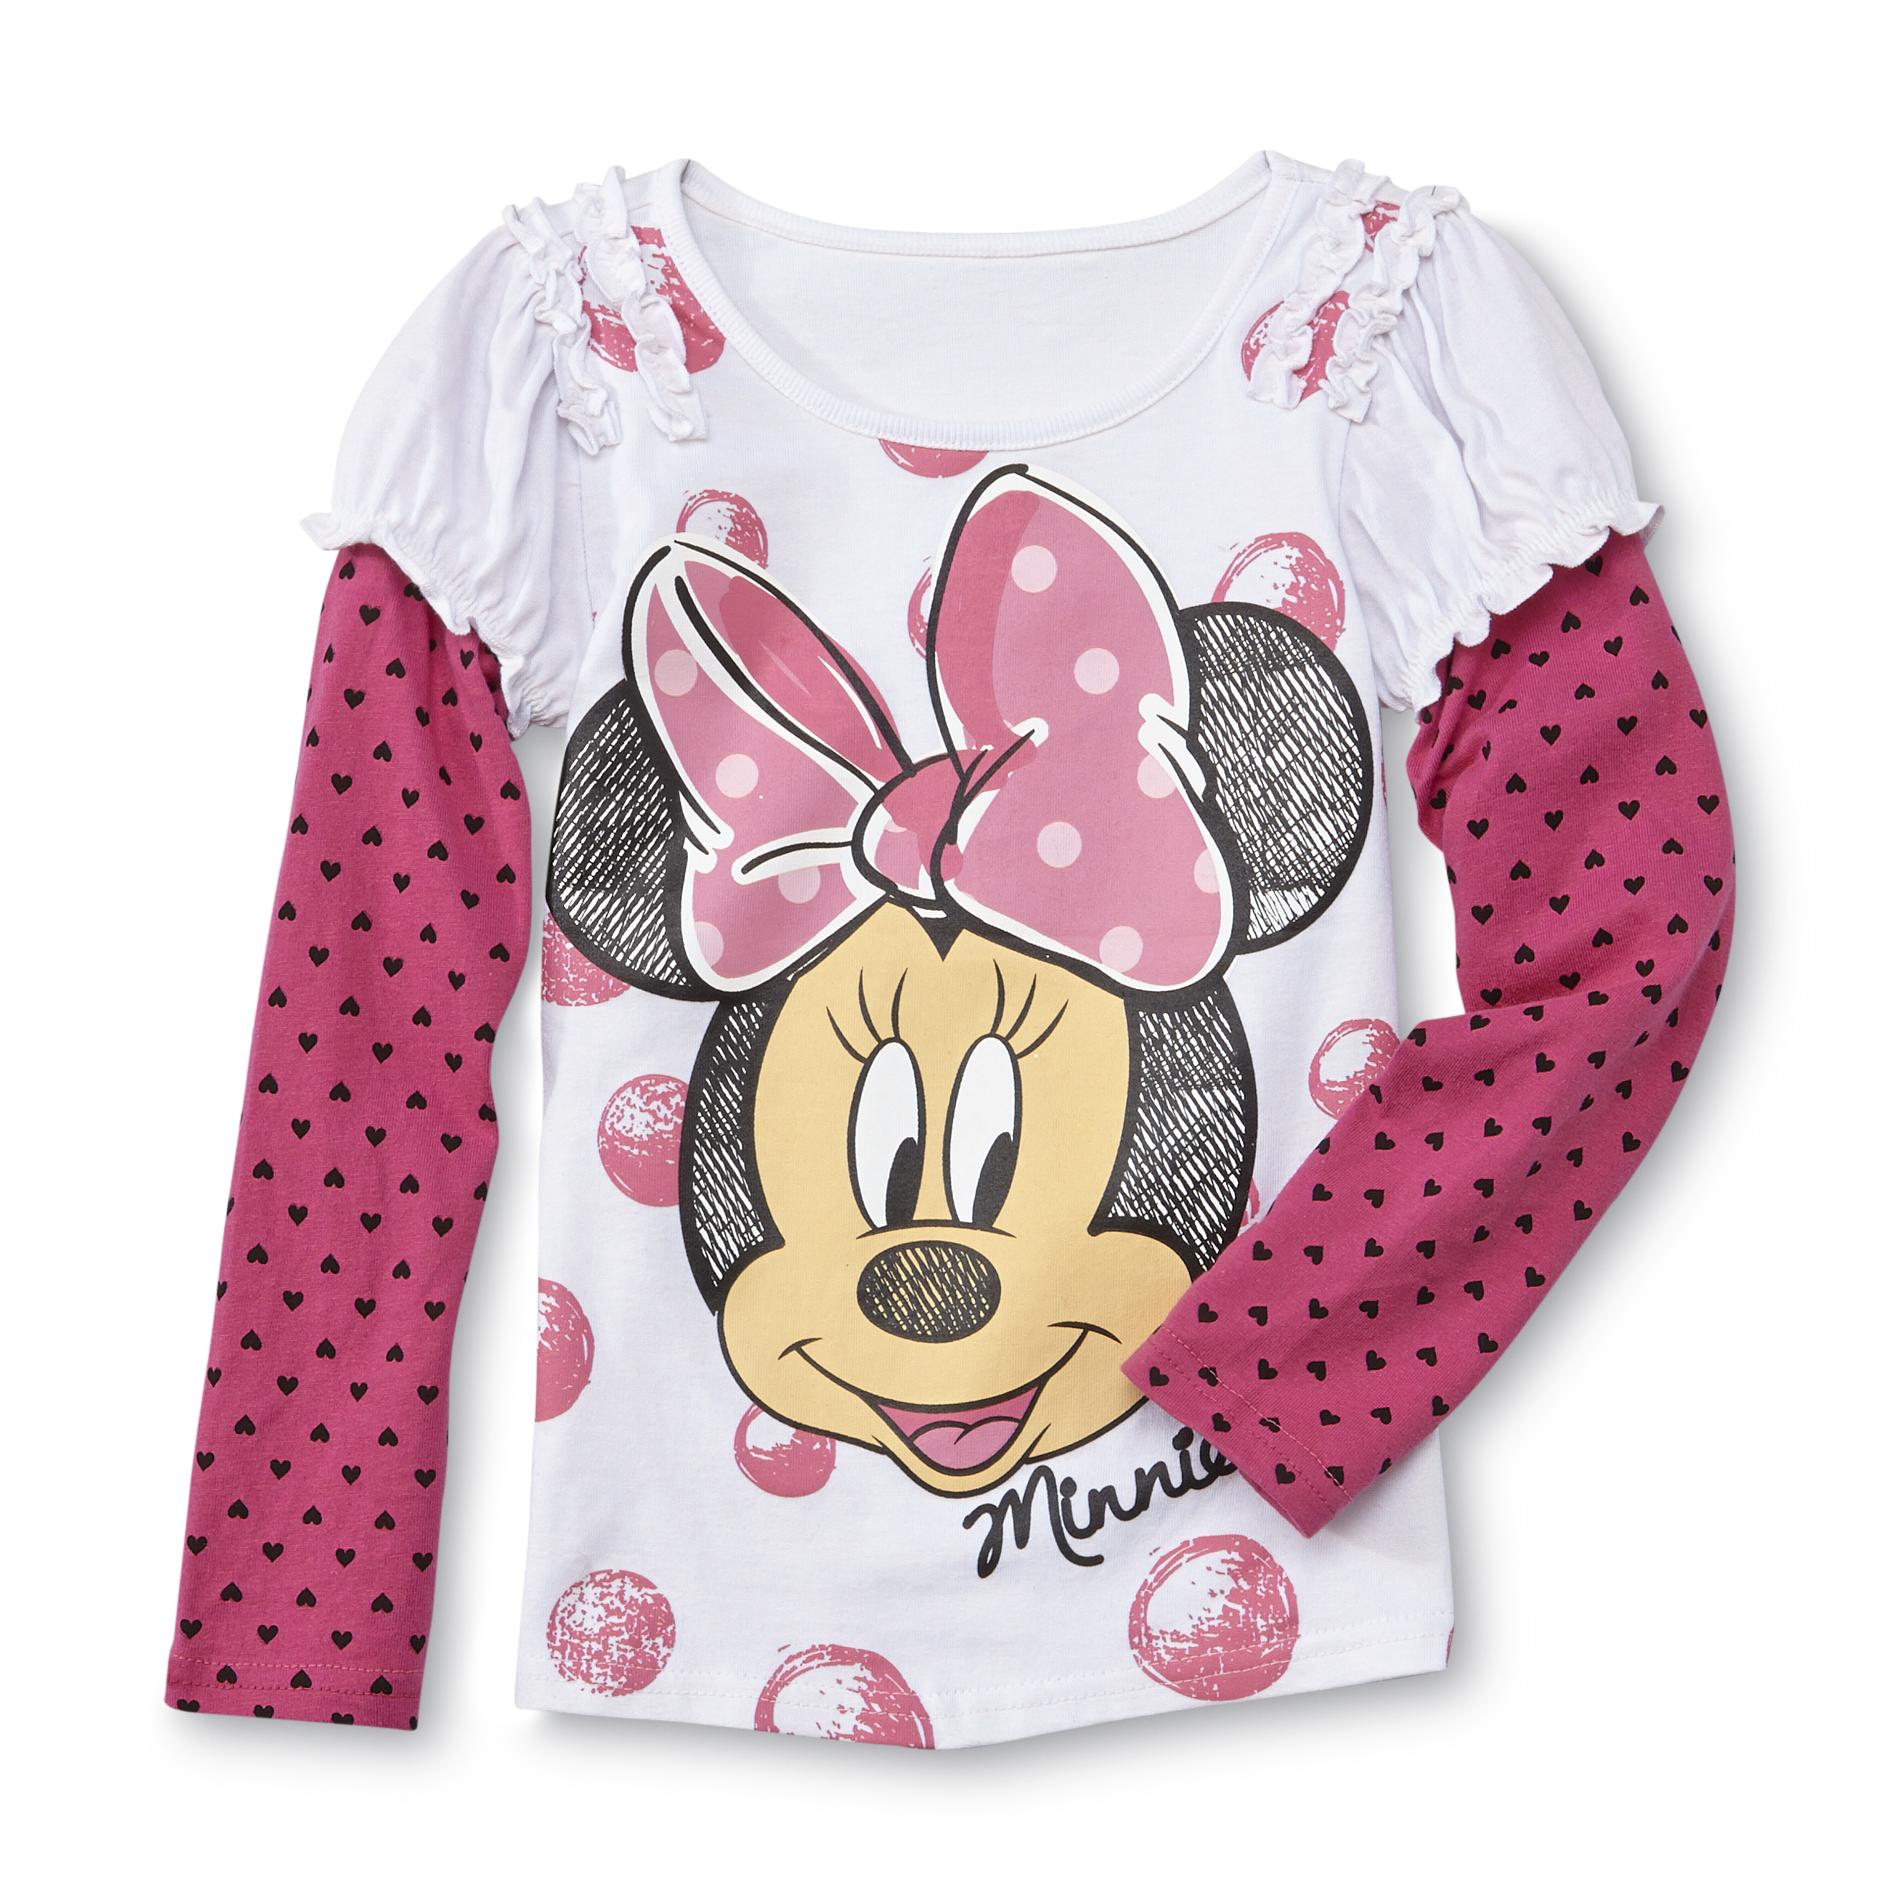 Disney Girl's Graphic Top - Minnie Mouse